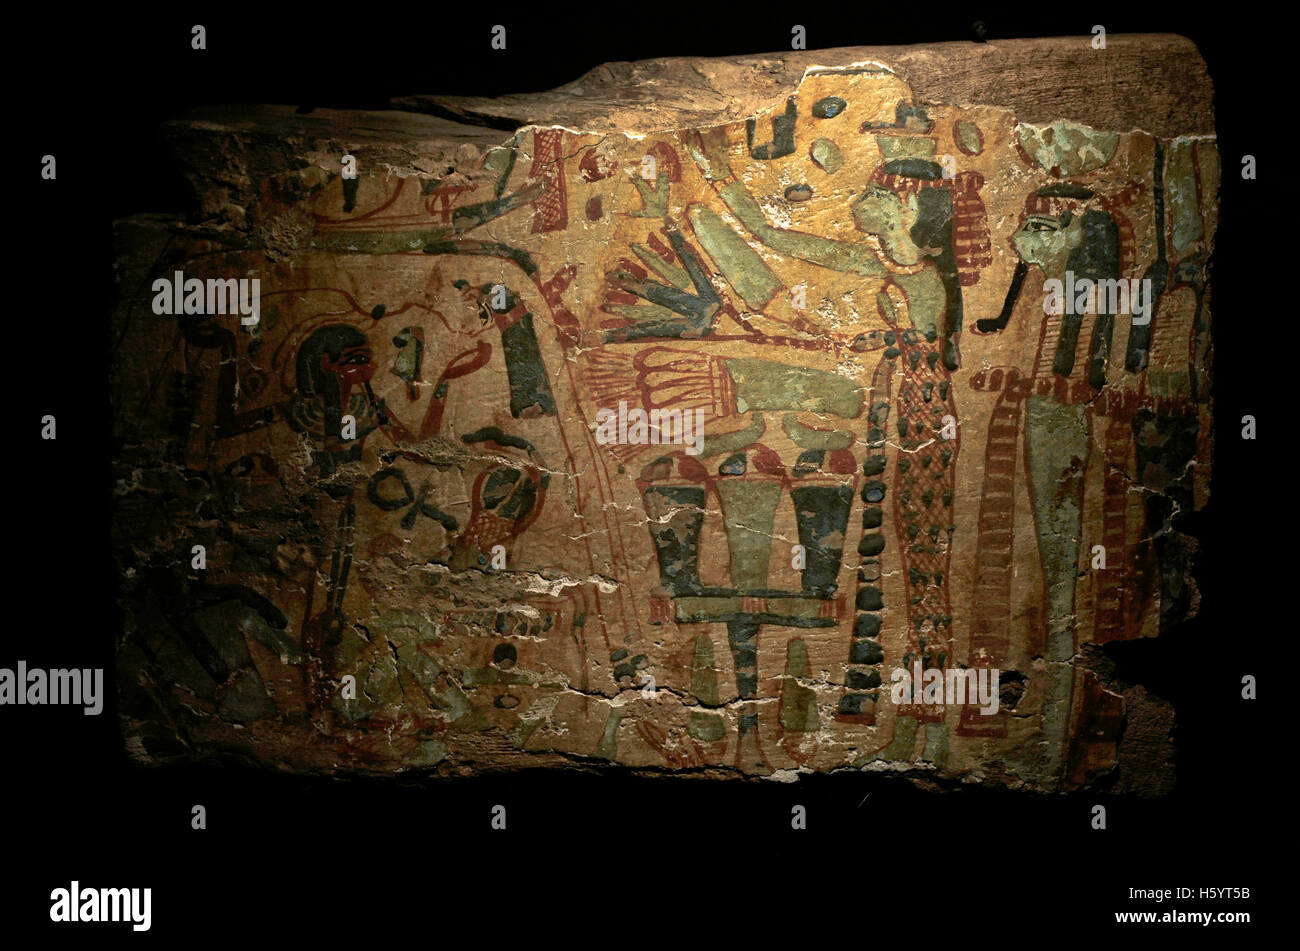 The creation by the Egyptians. Fragment of coffin painted in different colors. Type Deir el-Bahari. The sky Goddess Nut leans over the earth Geb. Between them, their father Shu keeps separated. The Sun God travels by boat above the back of Nut. 21st-22th Dynasties (1081-725 BC). Third Intermediate Period. Wood. Museum of Mediterranean and Near Eastern Antiquities. Stockholm. Sweden. Stock Photo